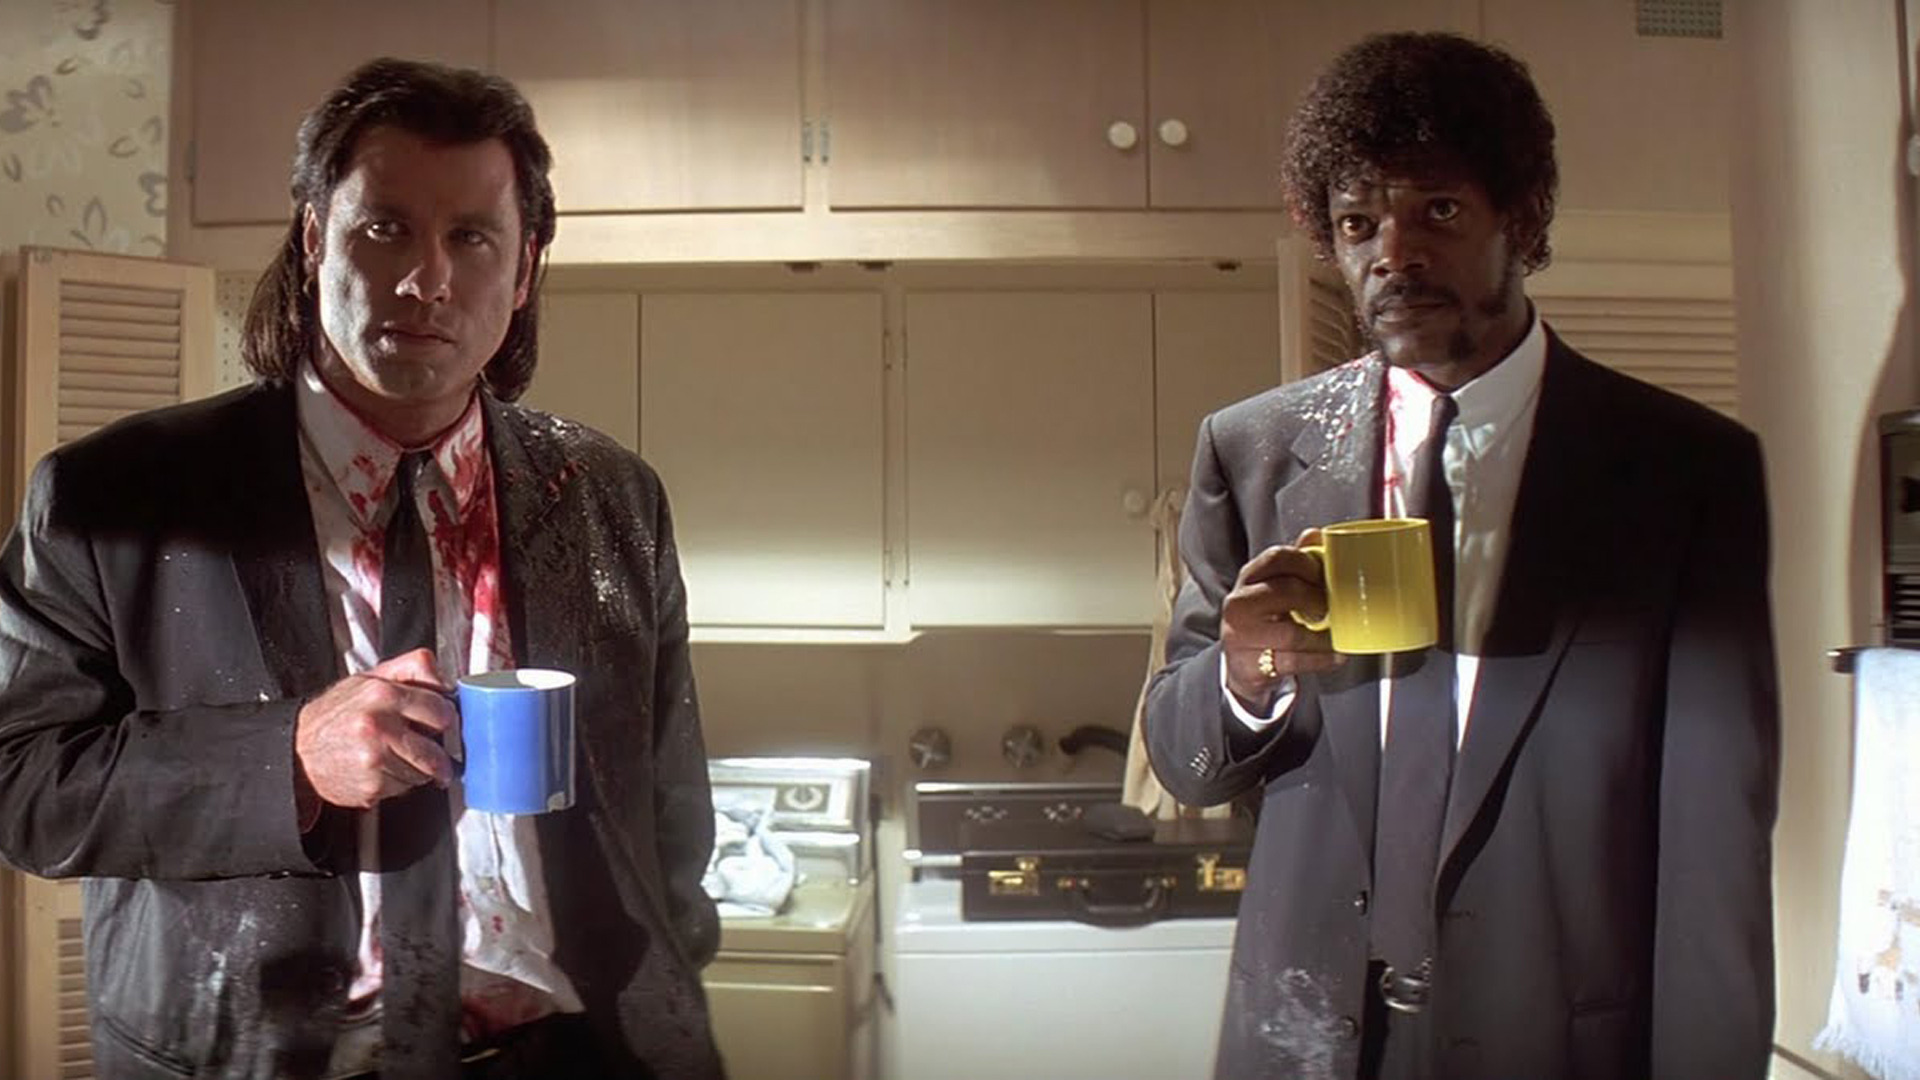 The Movies And Books That Influenced Quentin Tarantino’s ‘Pulp Fiction